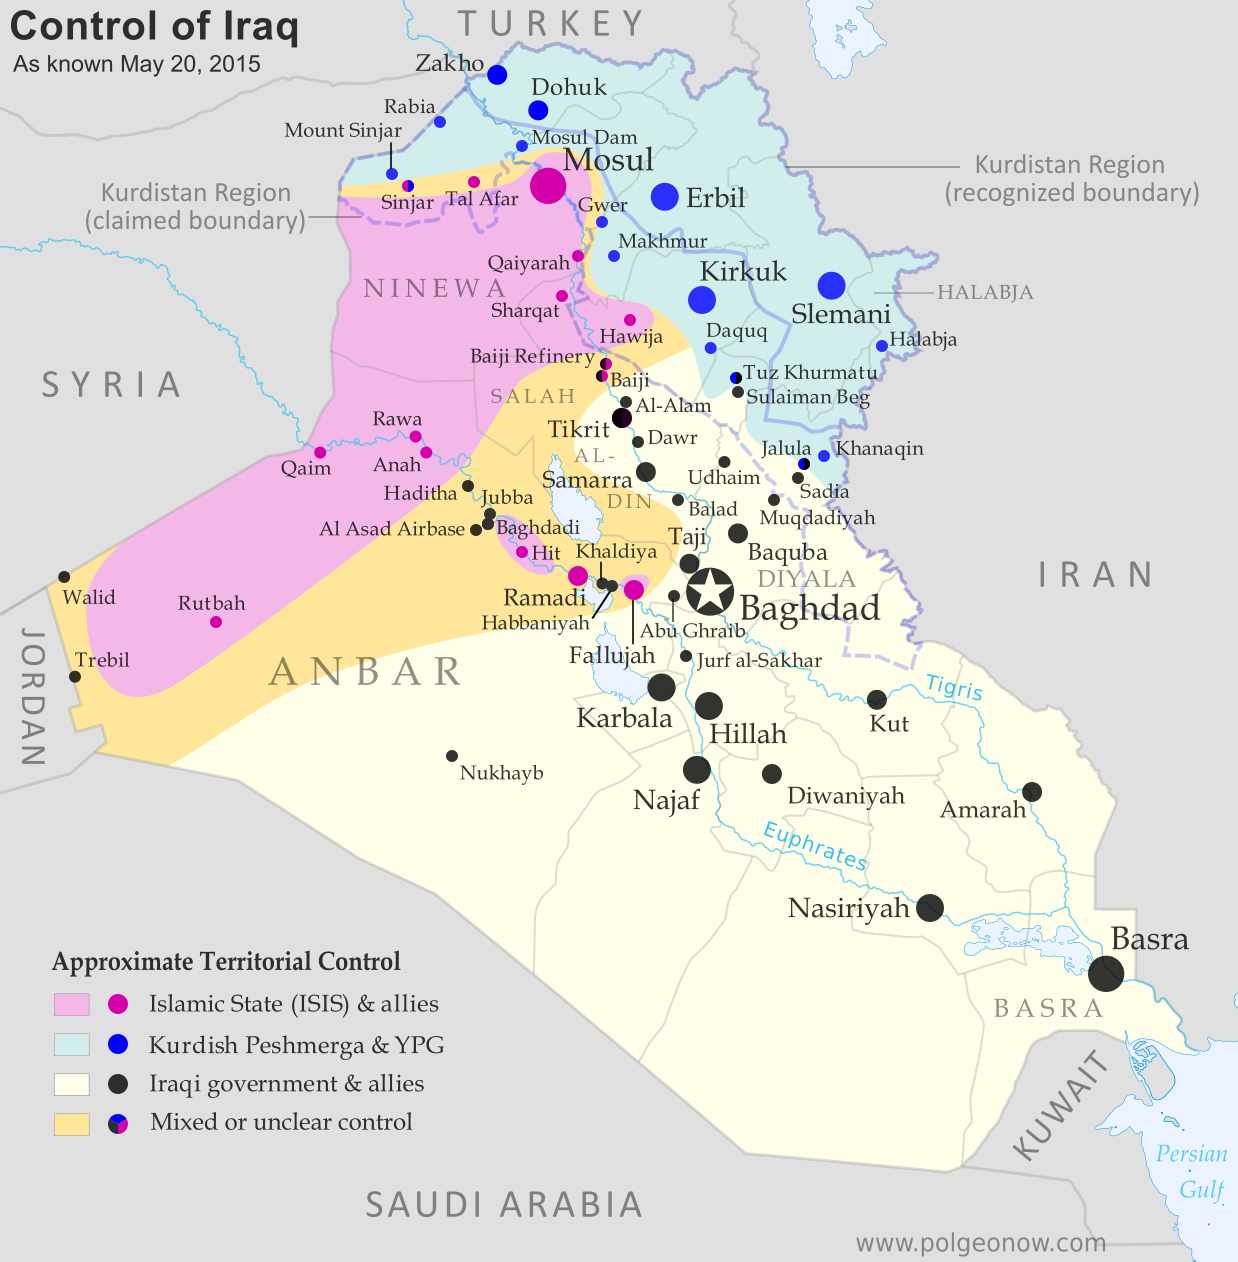 Detailed map of territorial control in Iraq as of May 20, 2015, including territory held by the Islamic State (ISIS, ISIL), the Baghdad government, and the Kurdistan Peshmerga. Includes recent flashpoints including Ramadi, Tikrit, Habbaniyah, Khaldiya, Sinjar, and others, as well as the recently created province of Halabja in Iraqi Kurdistan.